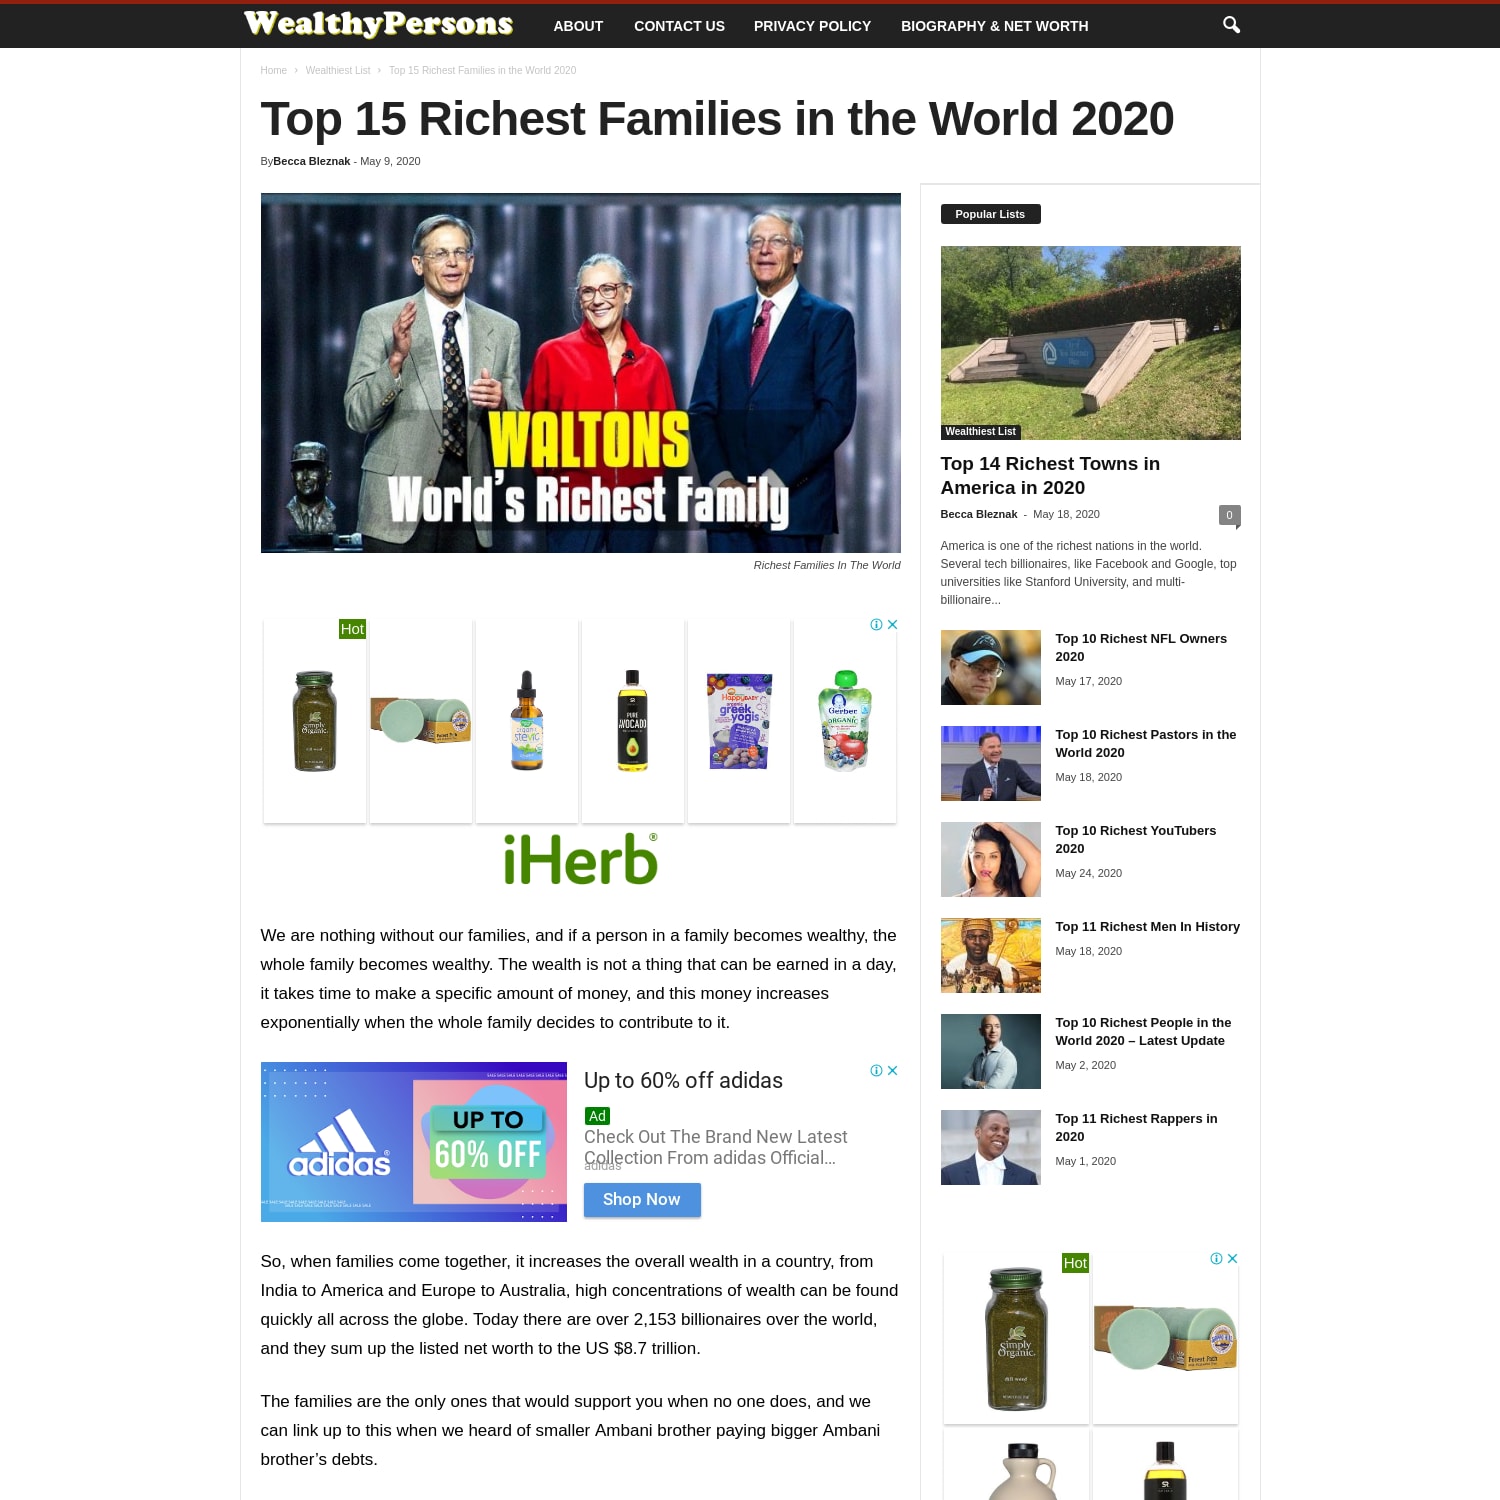 Top 15 Richest Families in the World 2020